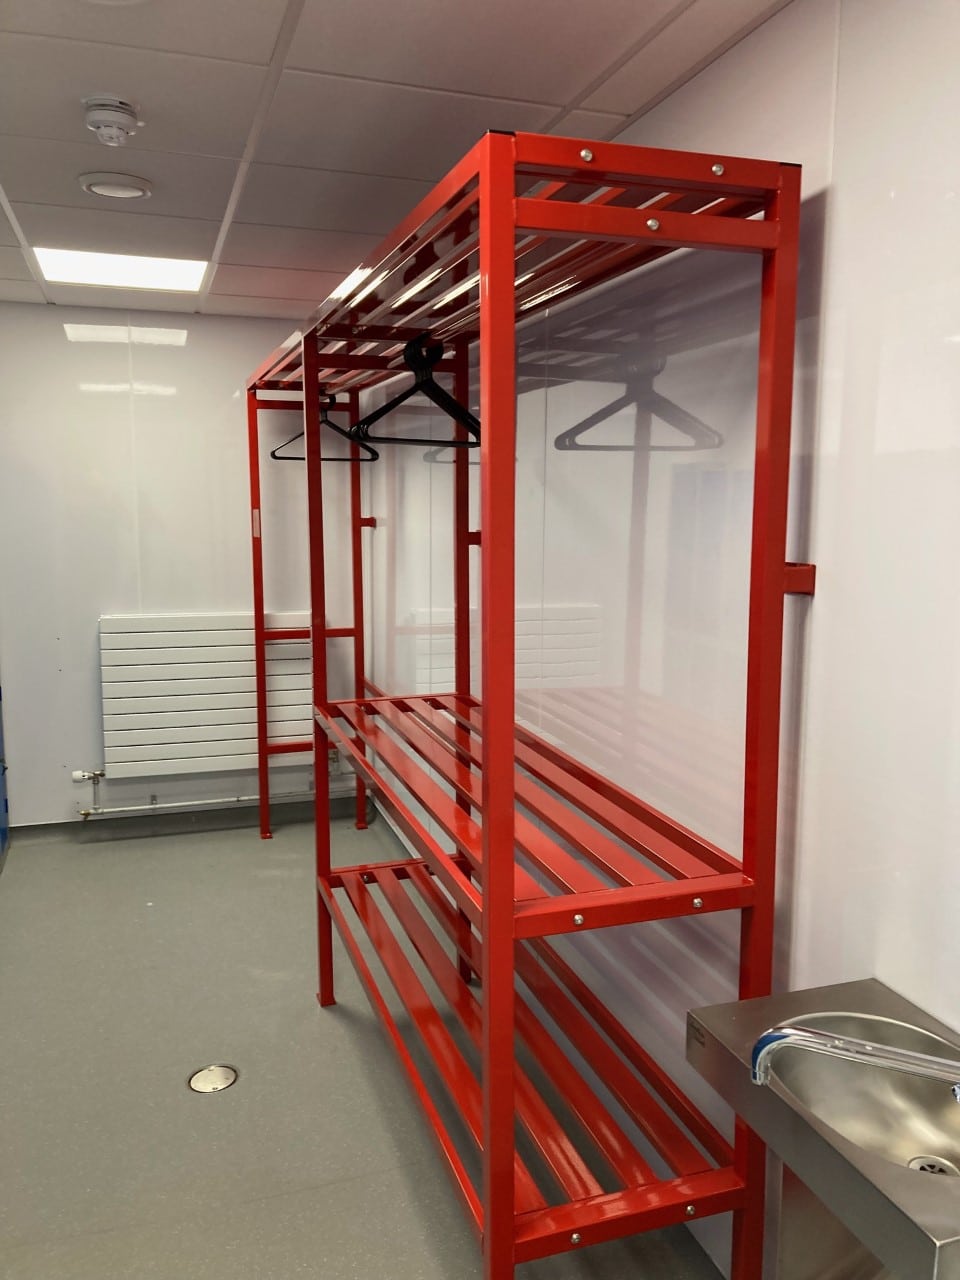 Fire & Rescue Military Drying Racks - Lockers For Schools And Leisure